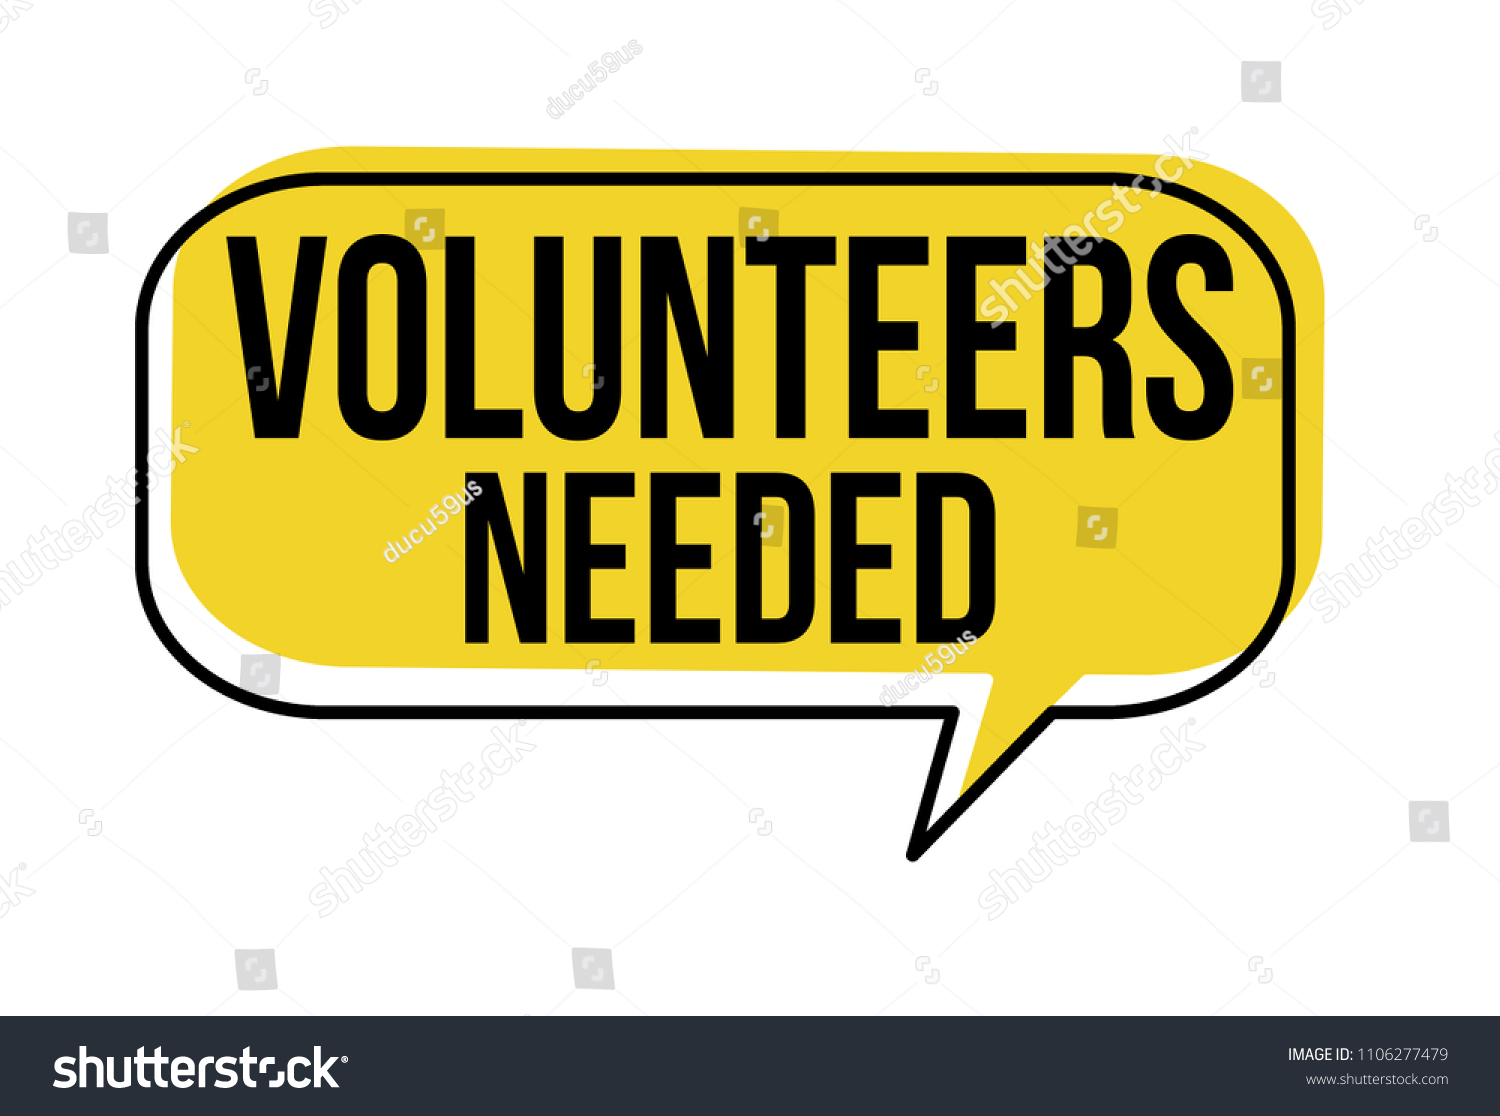 SVG of Volunteers needed speech bubble on white background, vector illustration svg